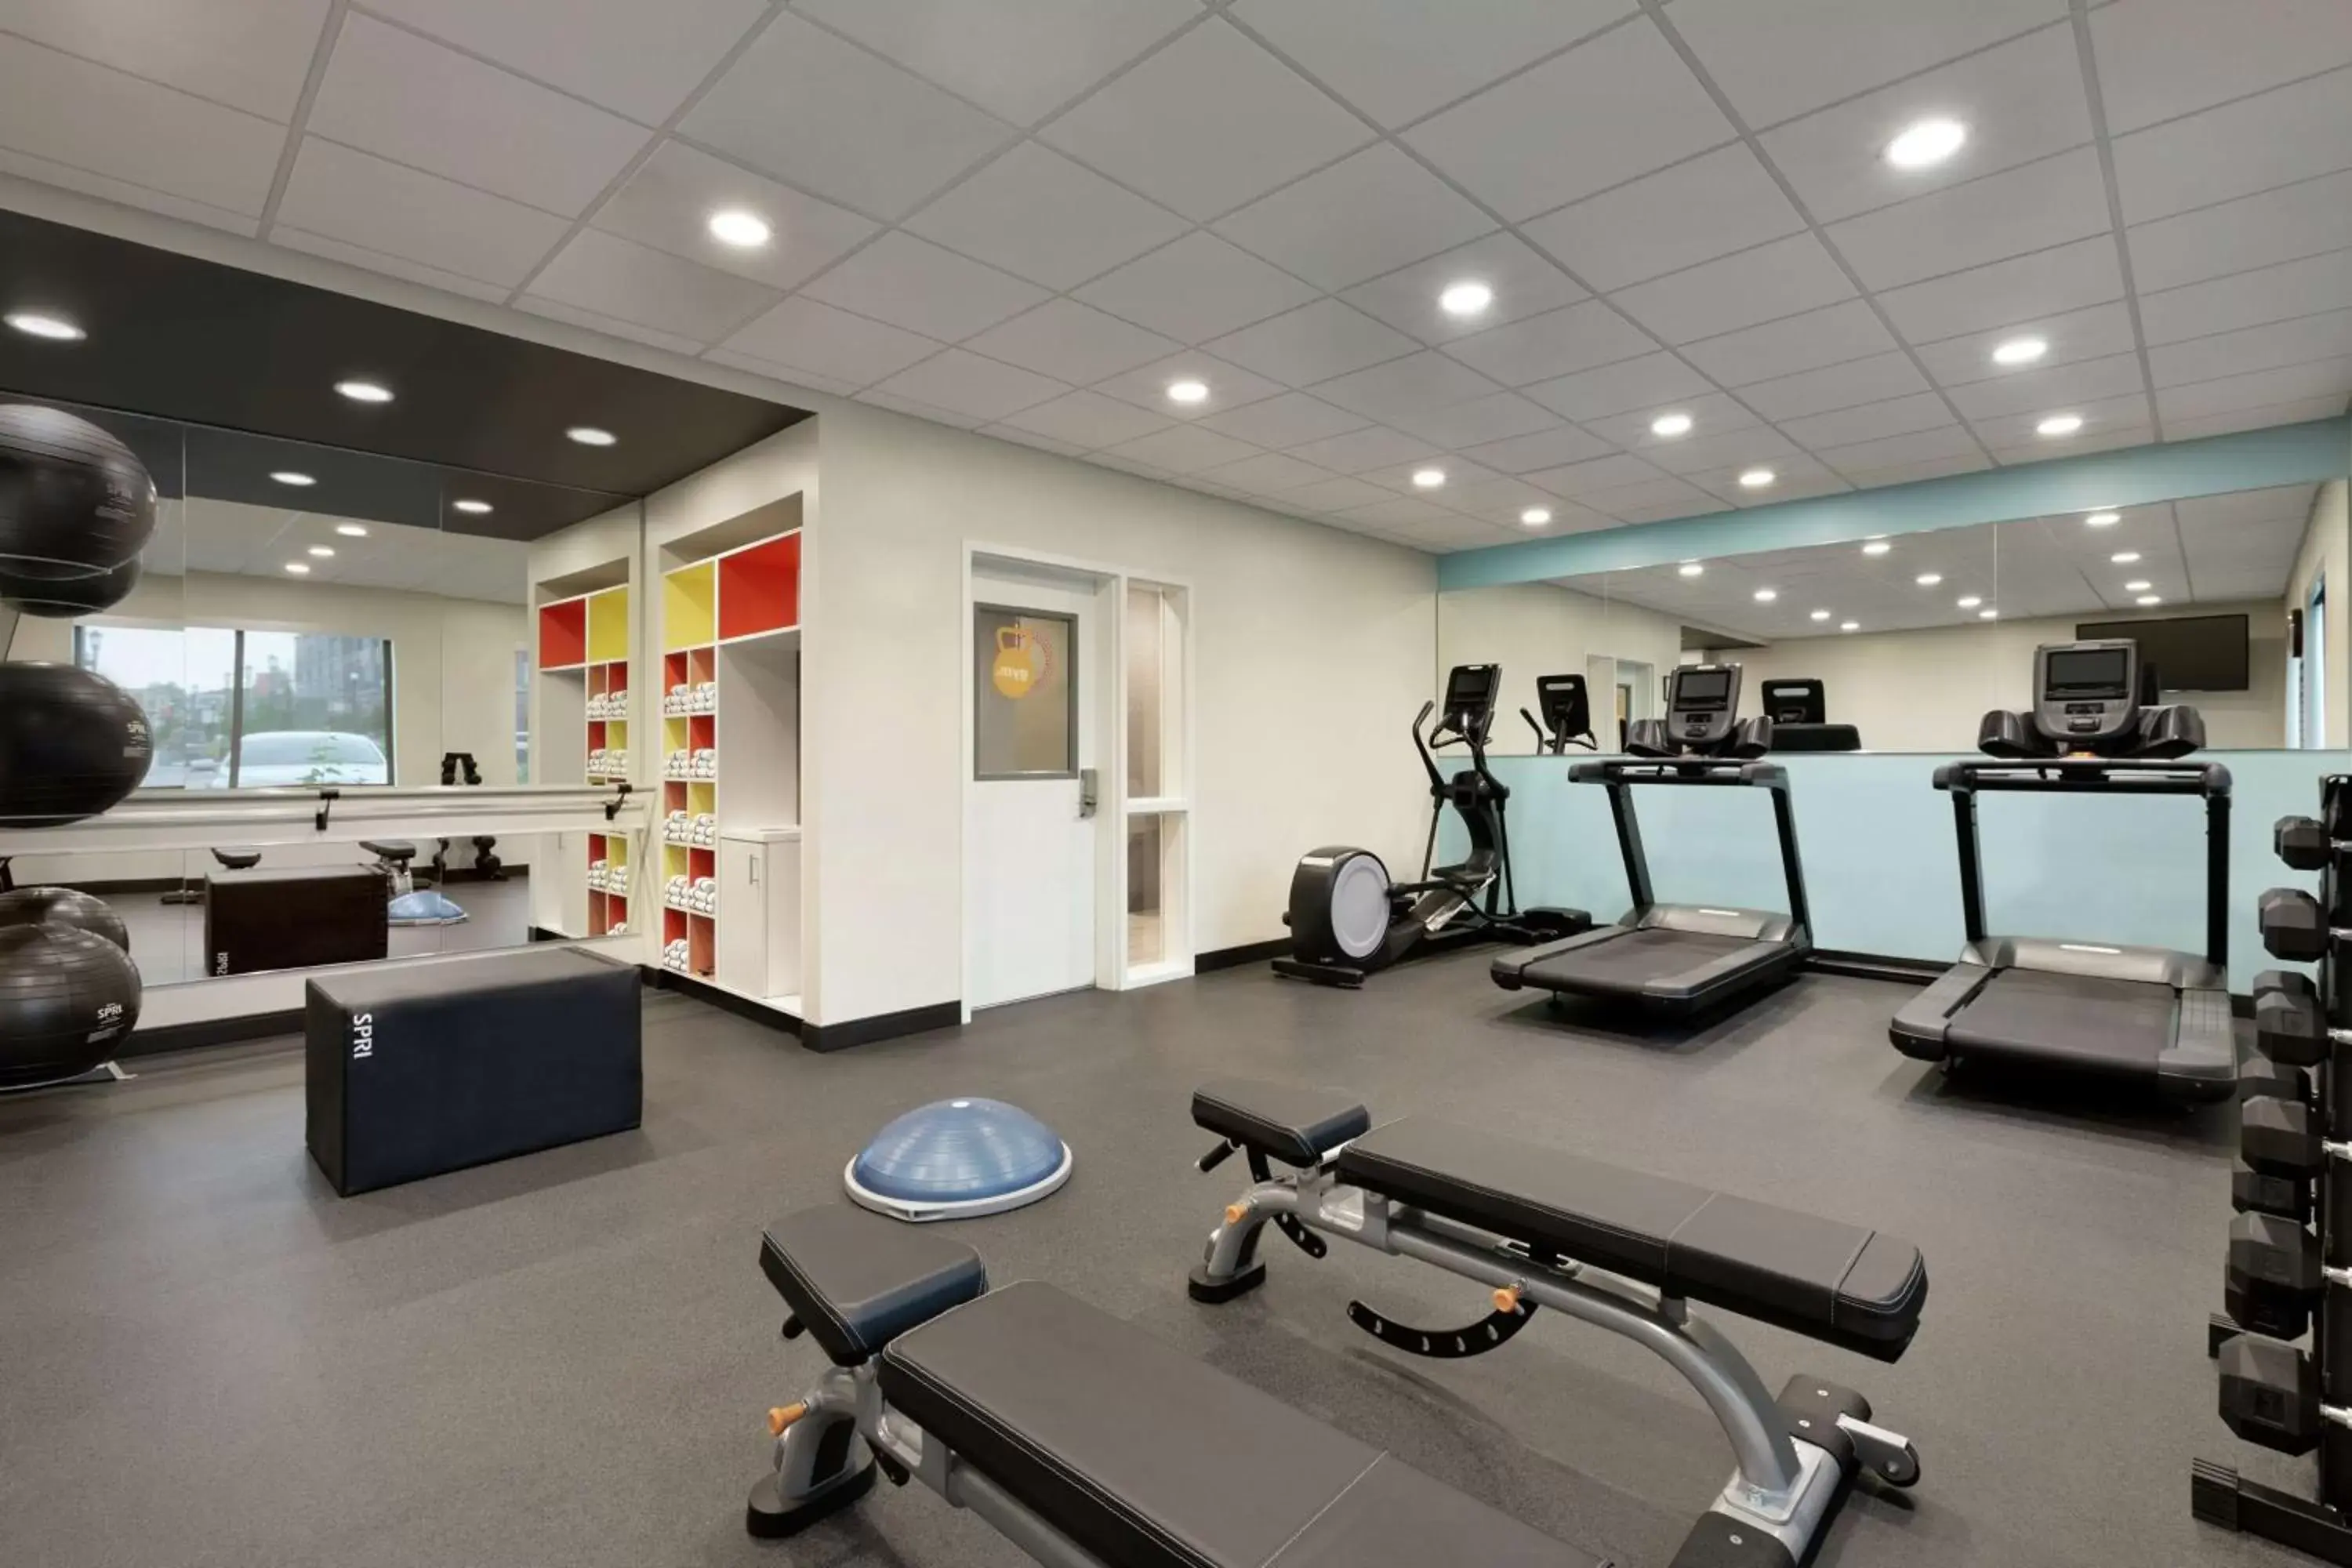 Fitness centre/facilities, Fitness Center/Facilities in Tru by Hilton St. Charles St. Louis